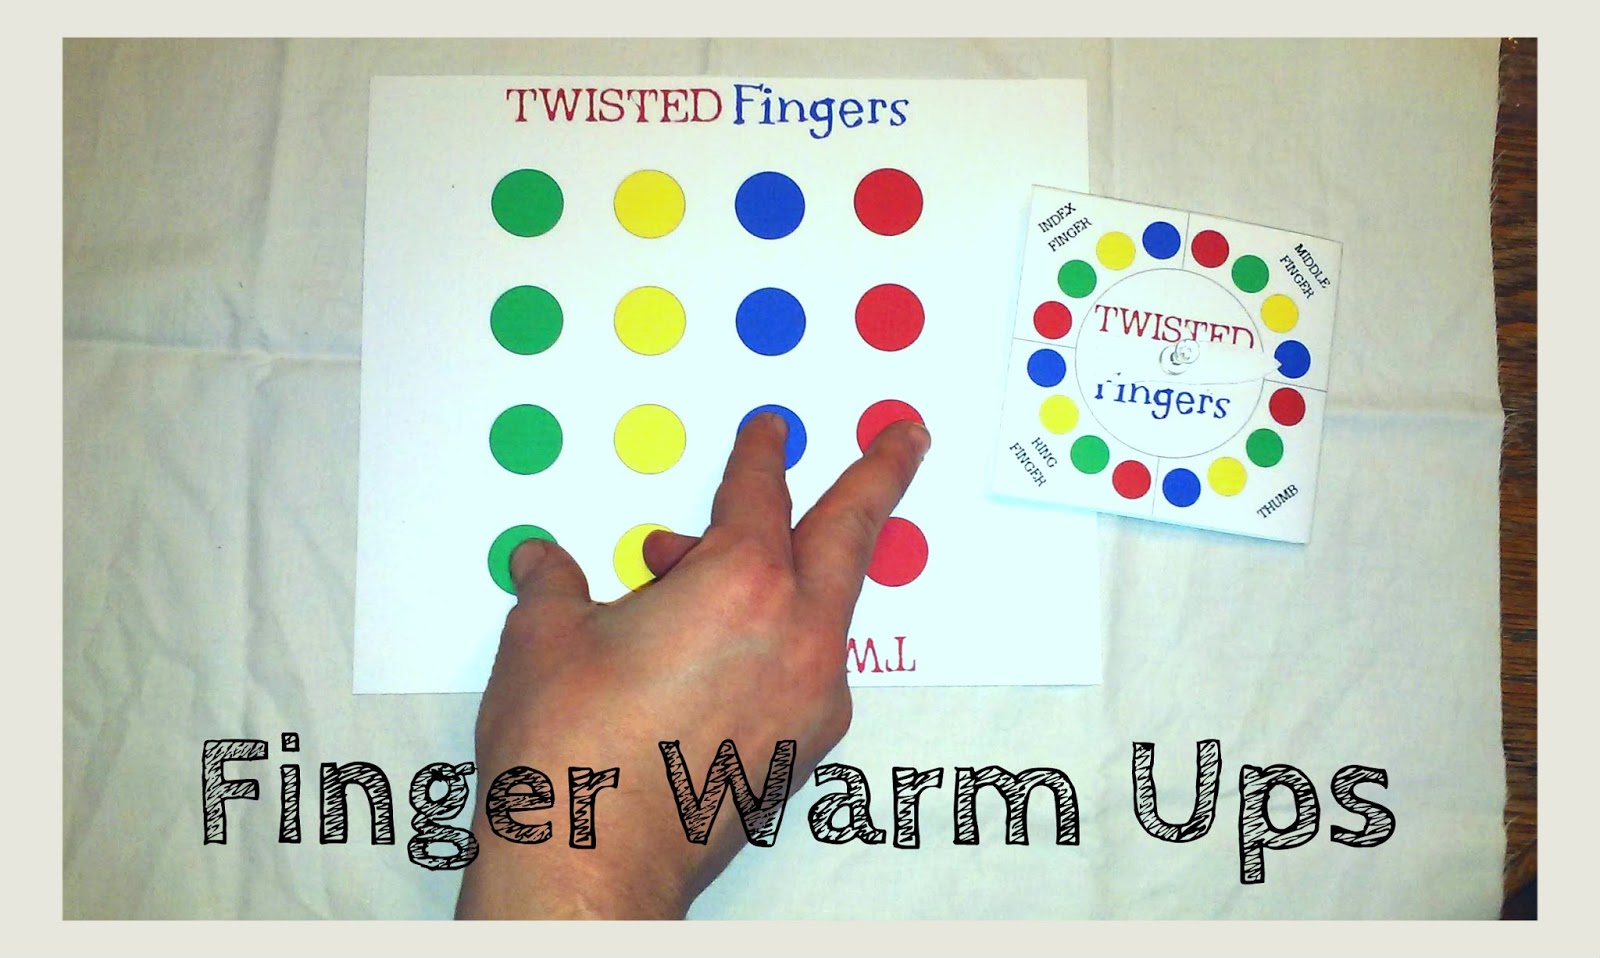 Finger Twister  Play Finger Twister on PrimaryGames